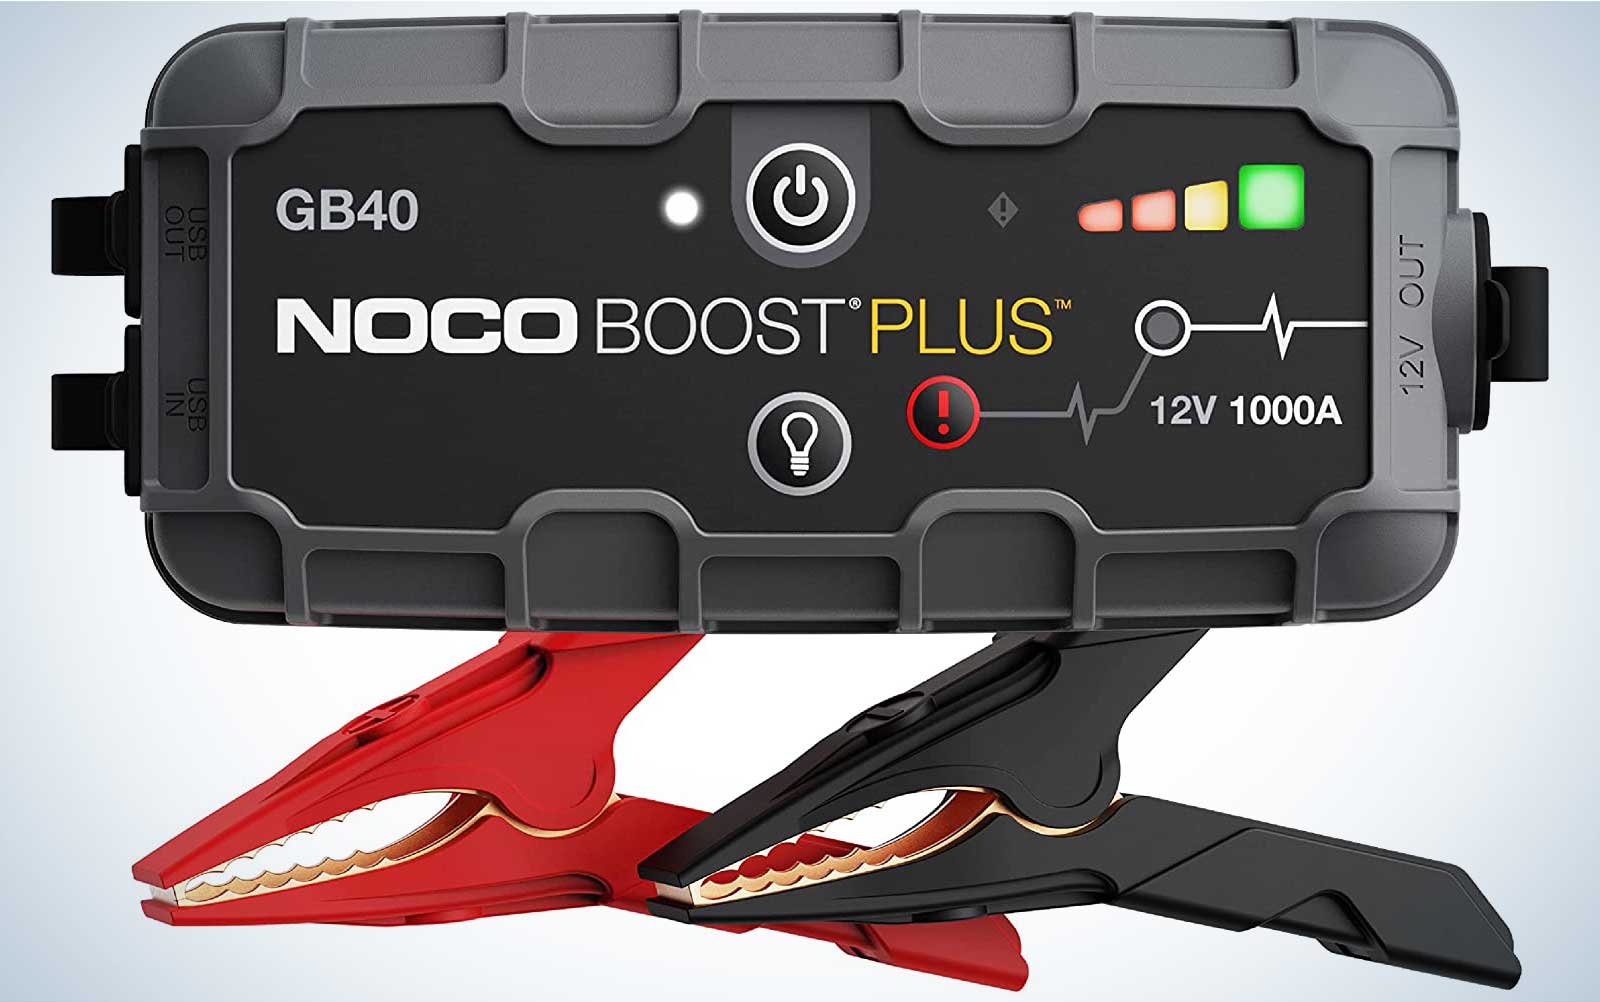 Noco Boost Plus car jump starter with its clamps on a plain background on-sale for Cyber Monday